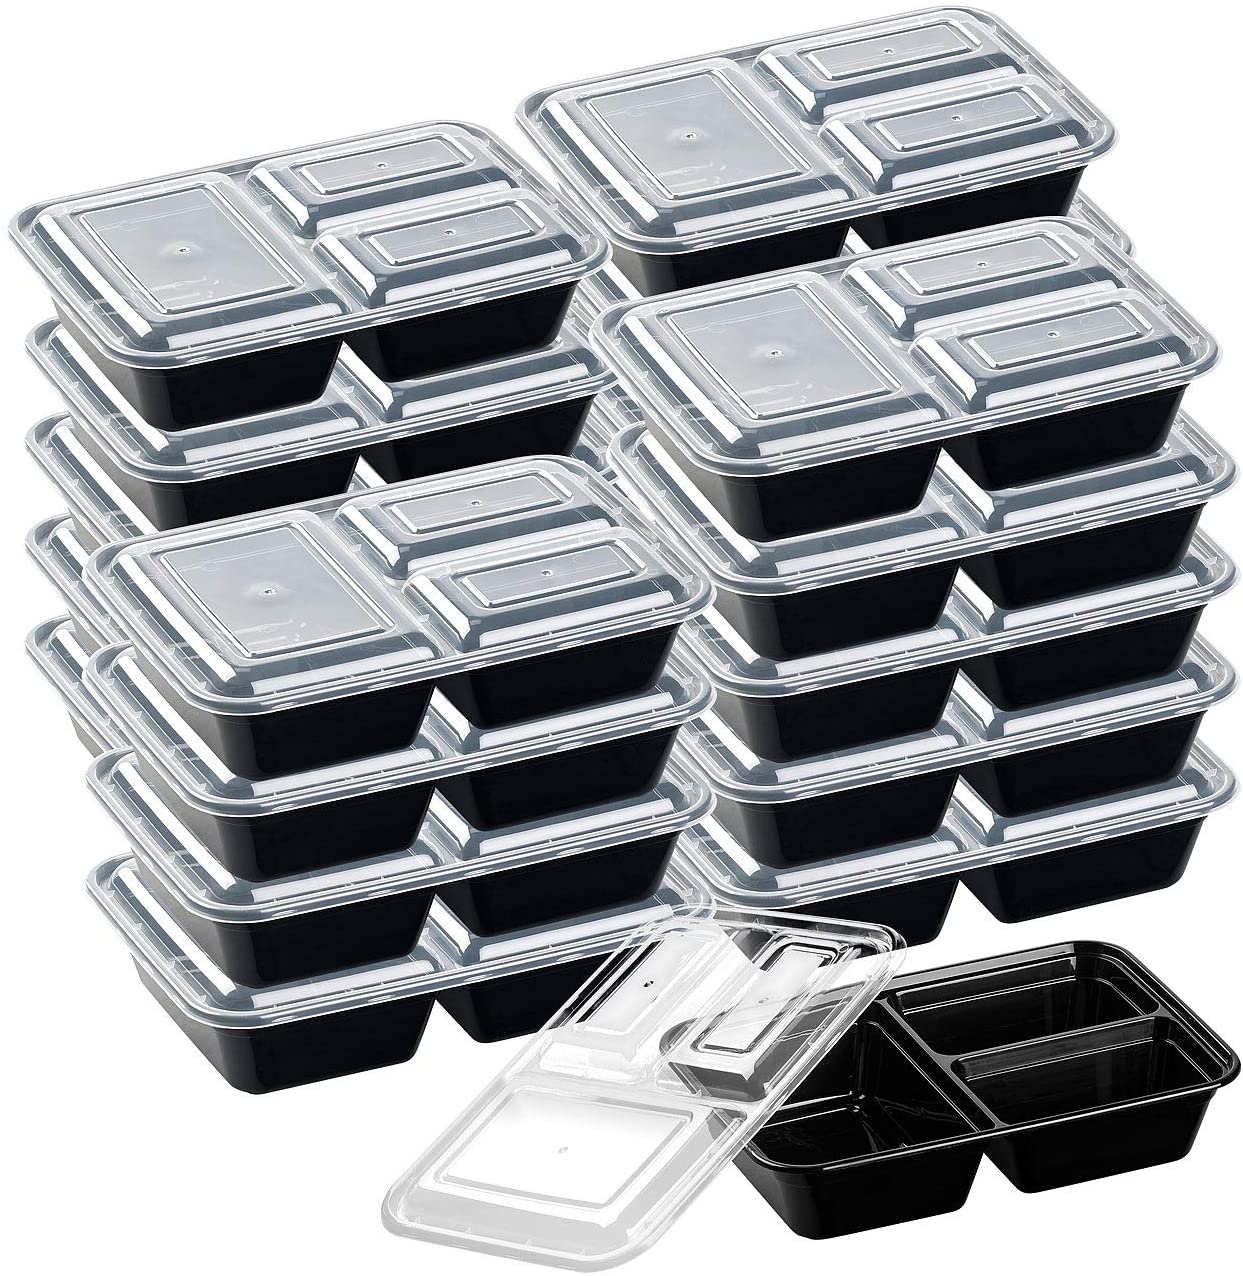 Rosenstein & Söhne Food Box - Set of 20 Food Boxes with 3 Dividers & Lid 1 Litre (Food Boxes)